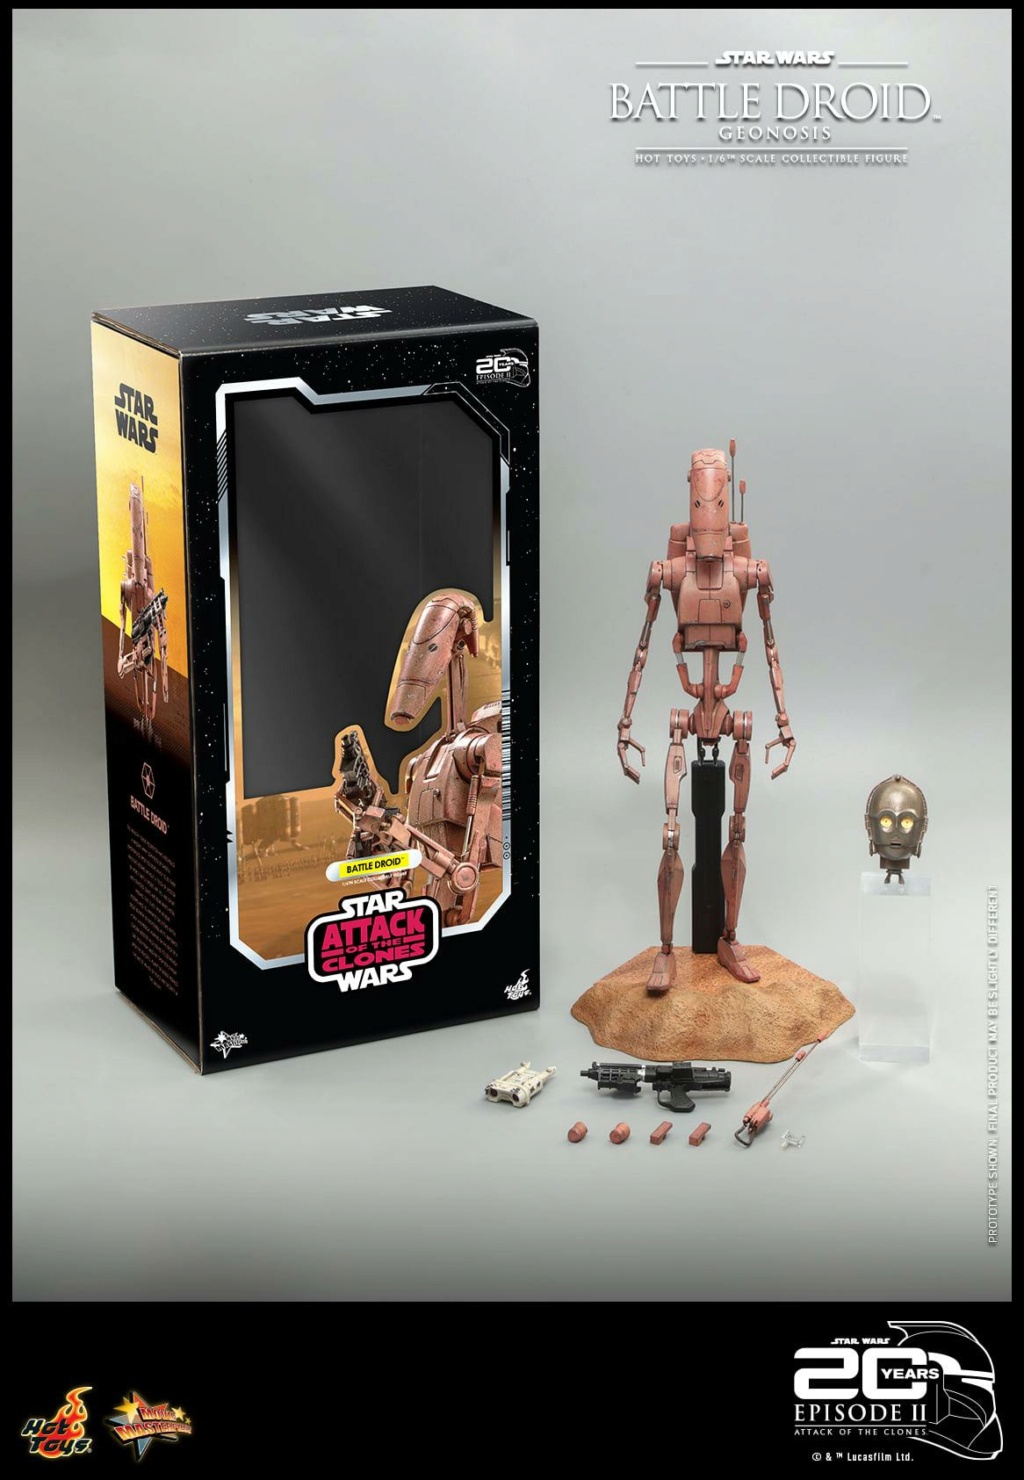 Star Wars Ep. II: Attack of the Clones - 1/6th Battle Droid (Geonosis) Battle43